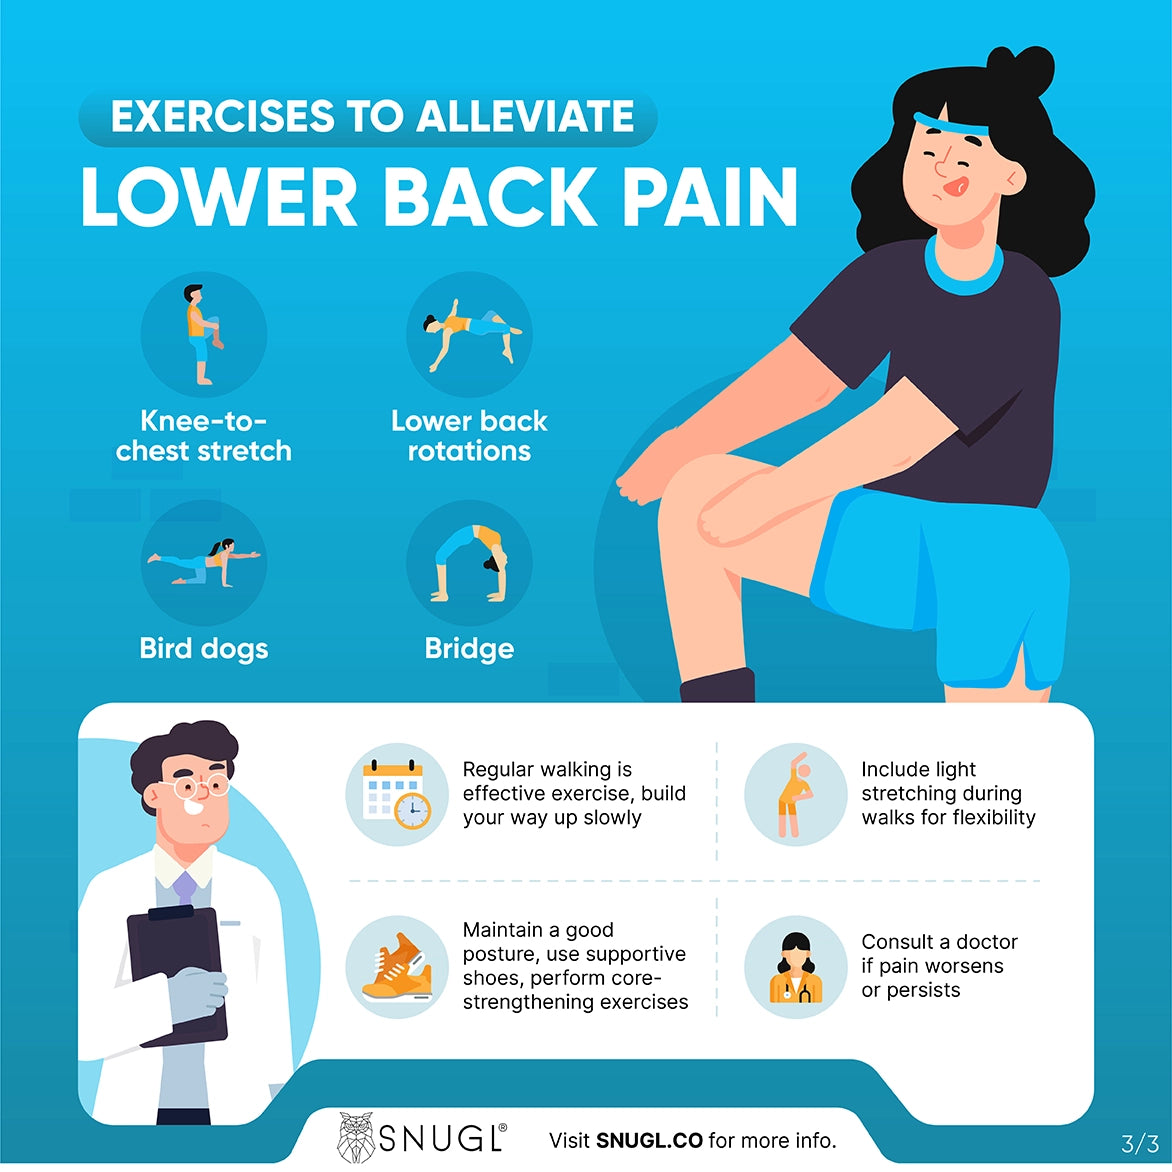 A summary infographic of the exercises to help lower back pain that happens when walking